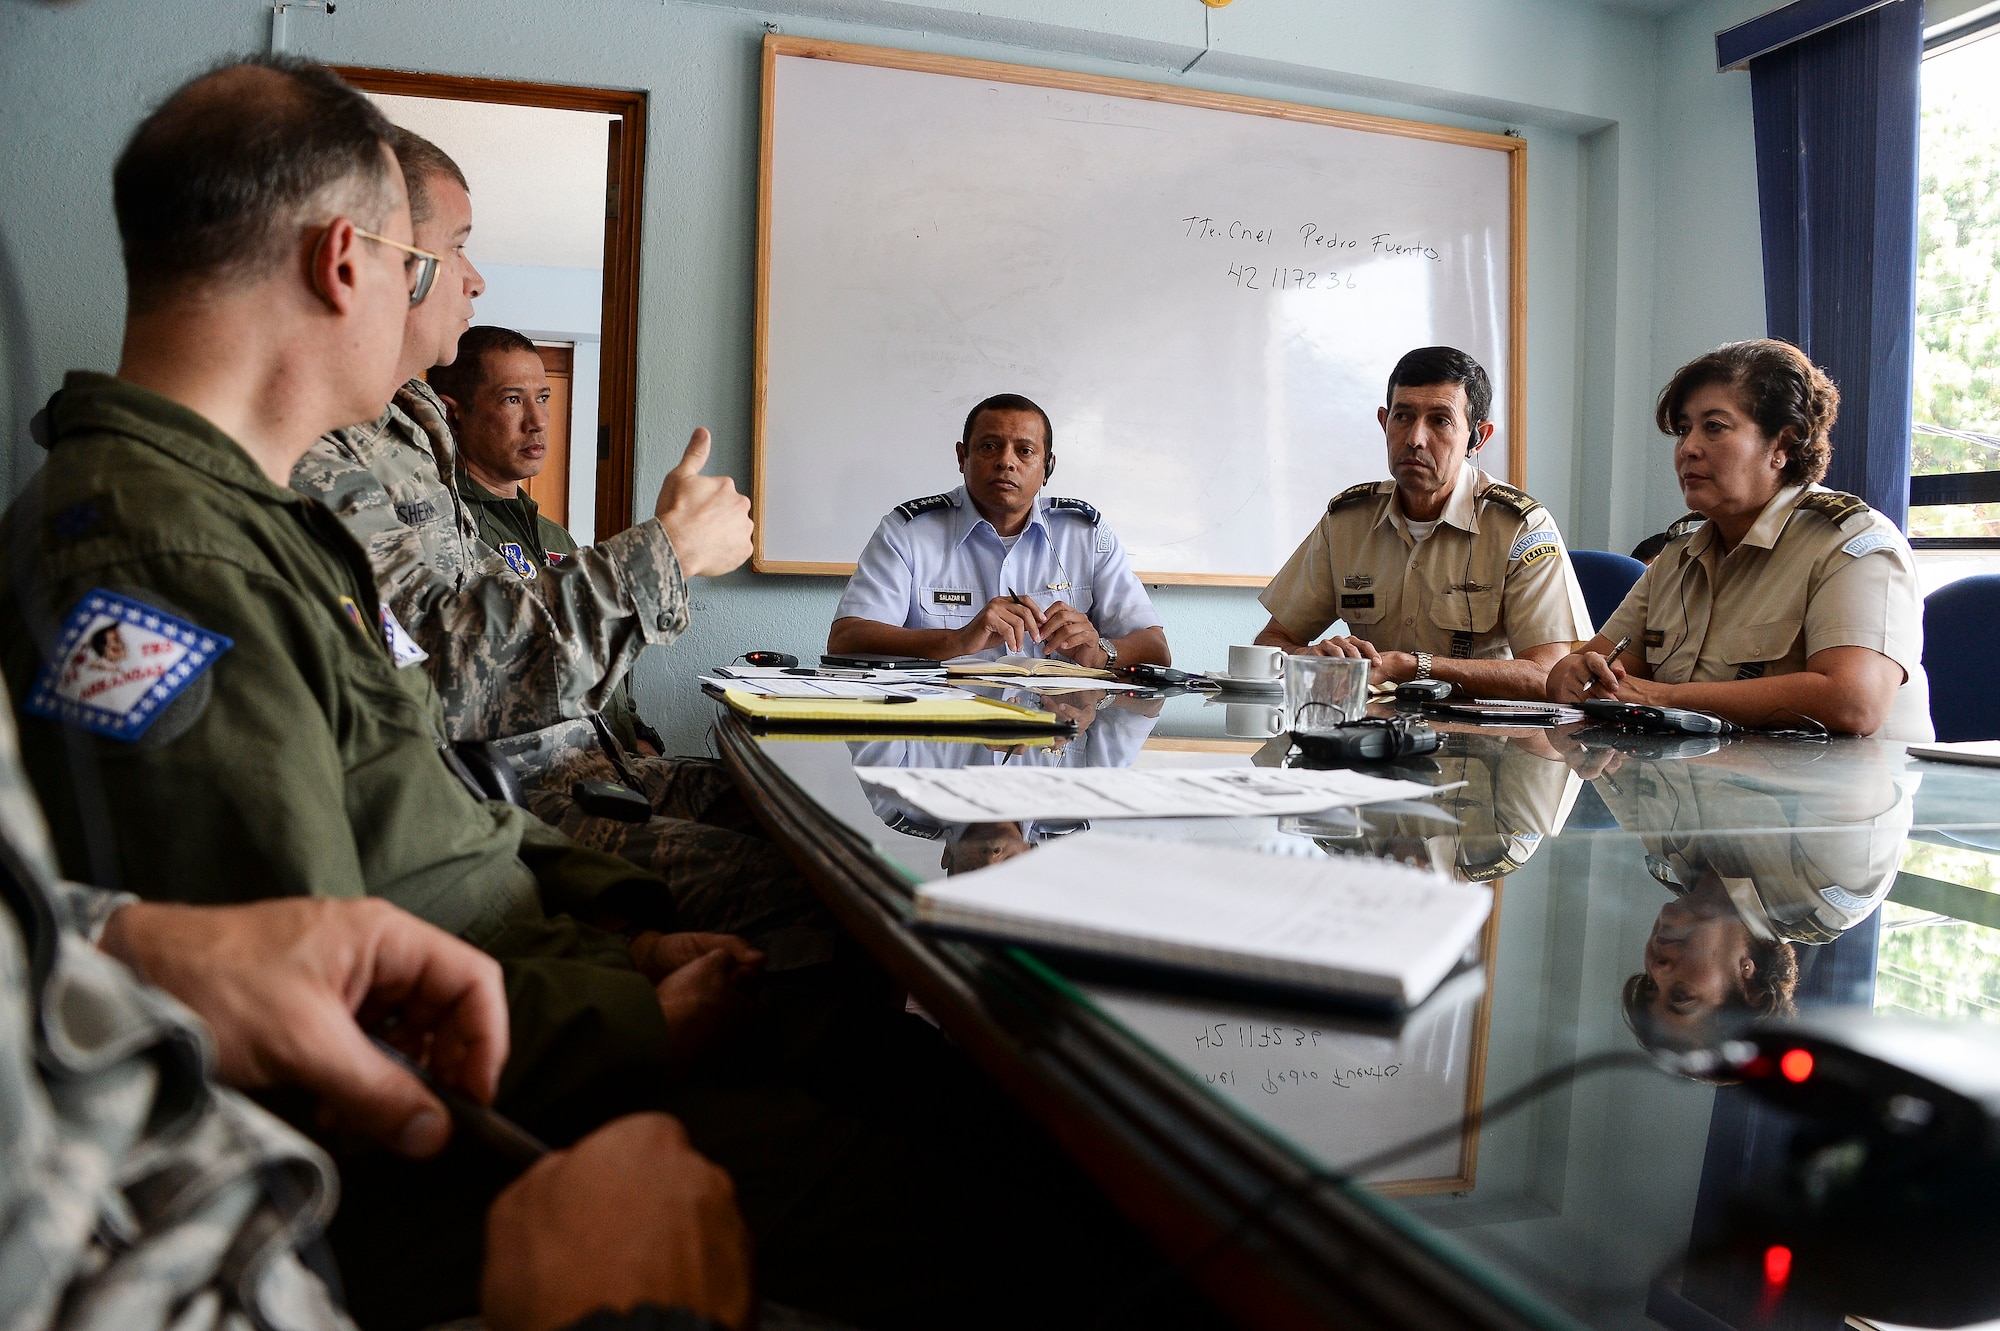 Lt. Cols. Eric Burdge and Paul Sherman along with Maj. Michael Kittell, assigned to Arkansas Air National Guard, discuss the goals for a subject matter expert exchange with the Guatemalan Military in Guatemala City, Guatemala, Aug. 4, 2014. Goals focused on educating the Guatemalan air force on individual readiness and establishing standards for flight medicine. (U.S. Air Force photo by Tech. Sgt. Heather R. Redman/Released)